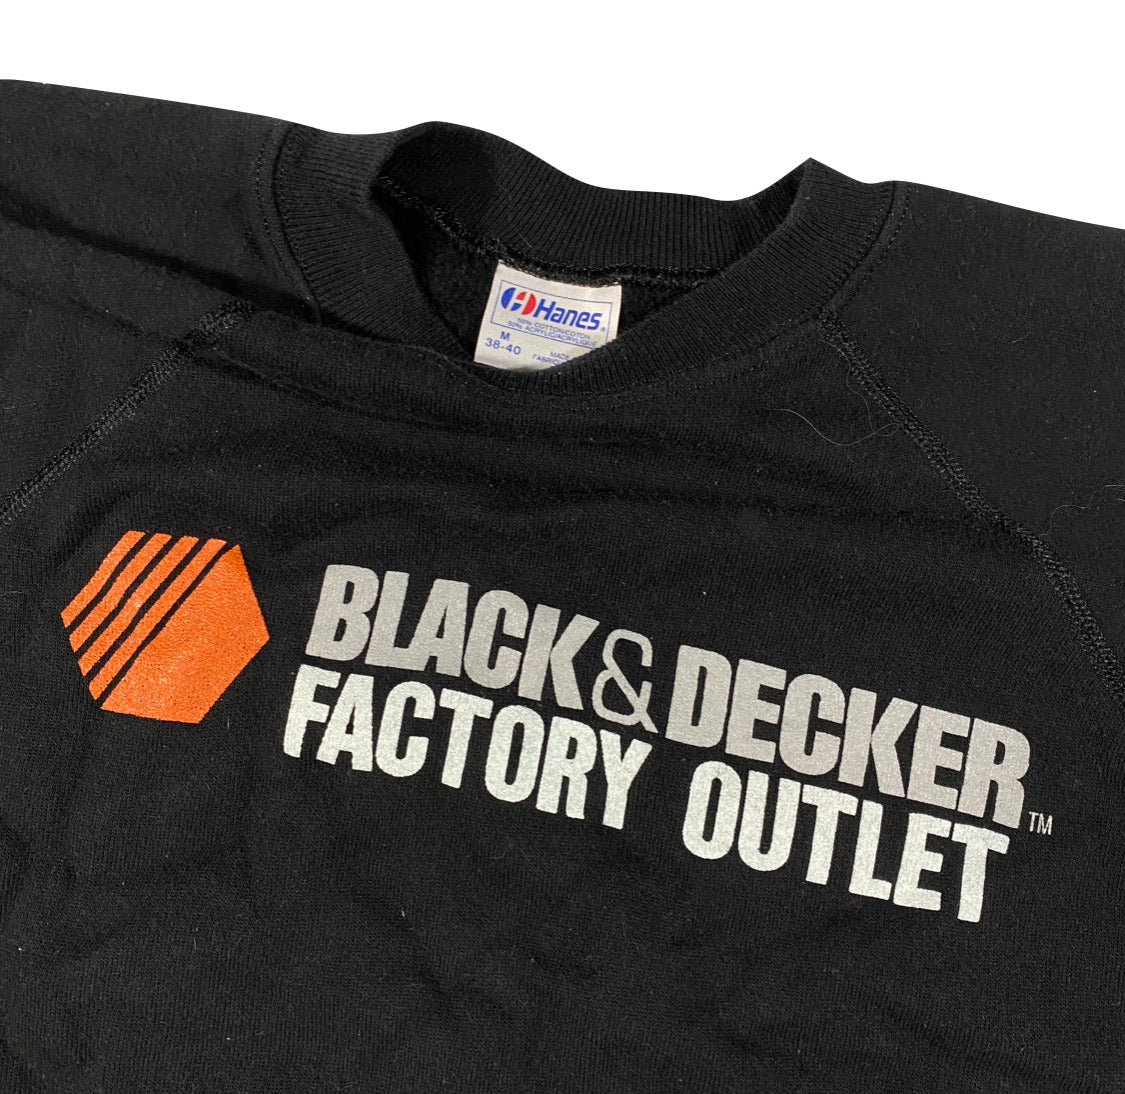 80s black and decker outlet sweatshirt S/M